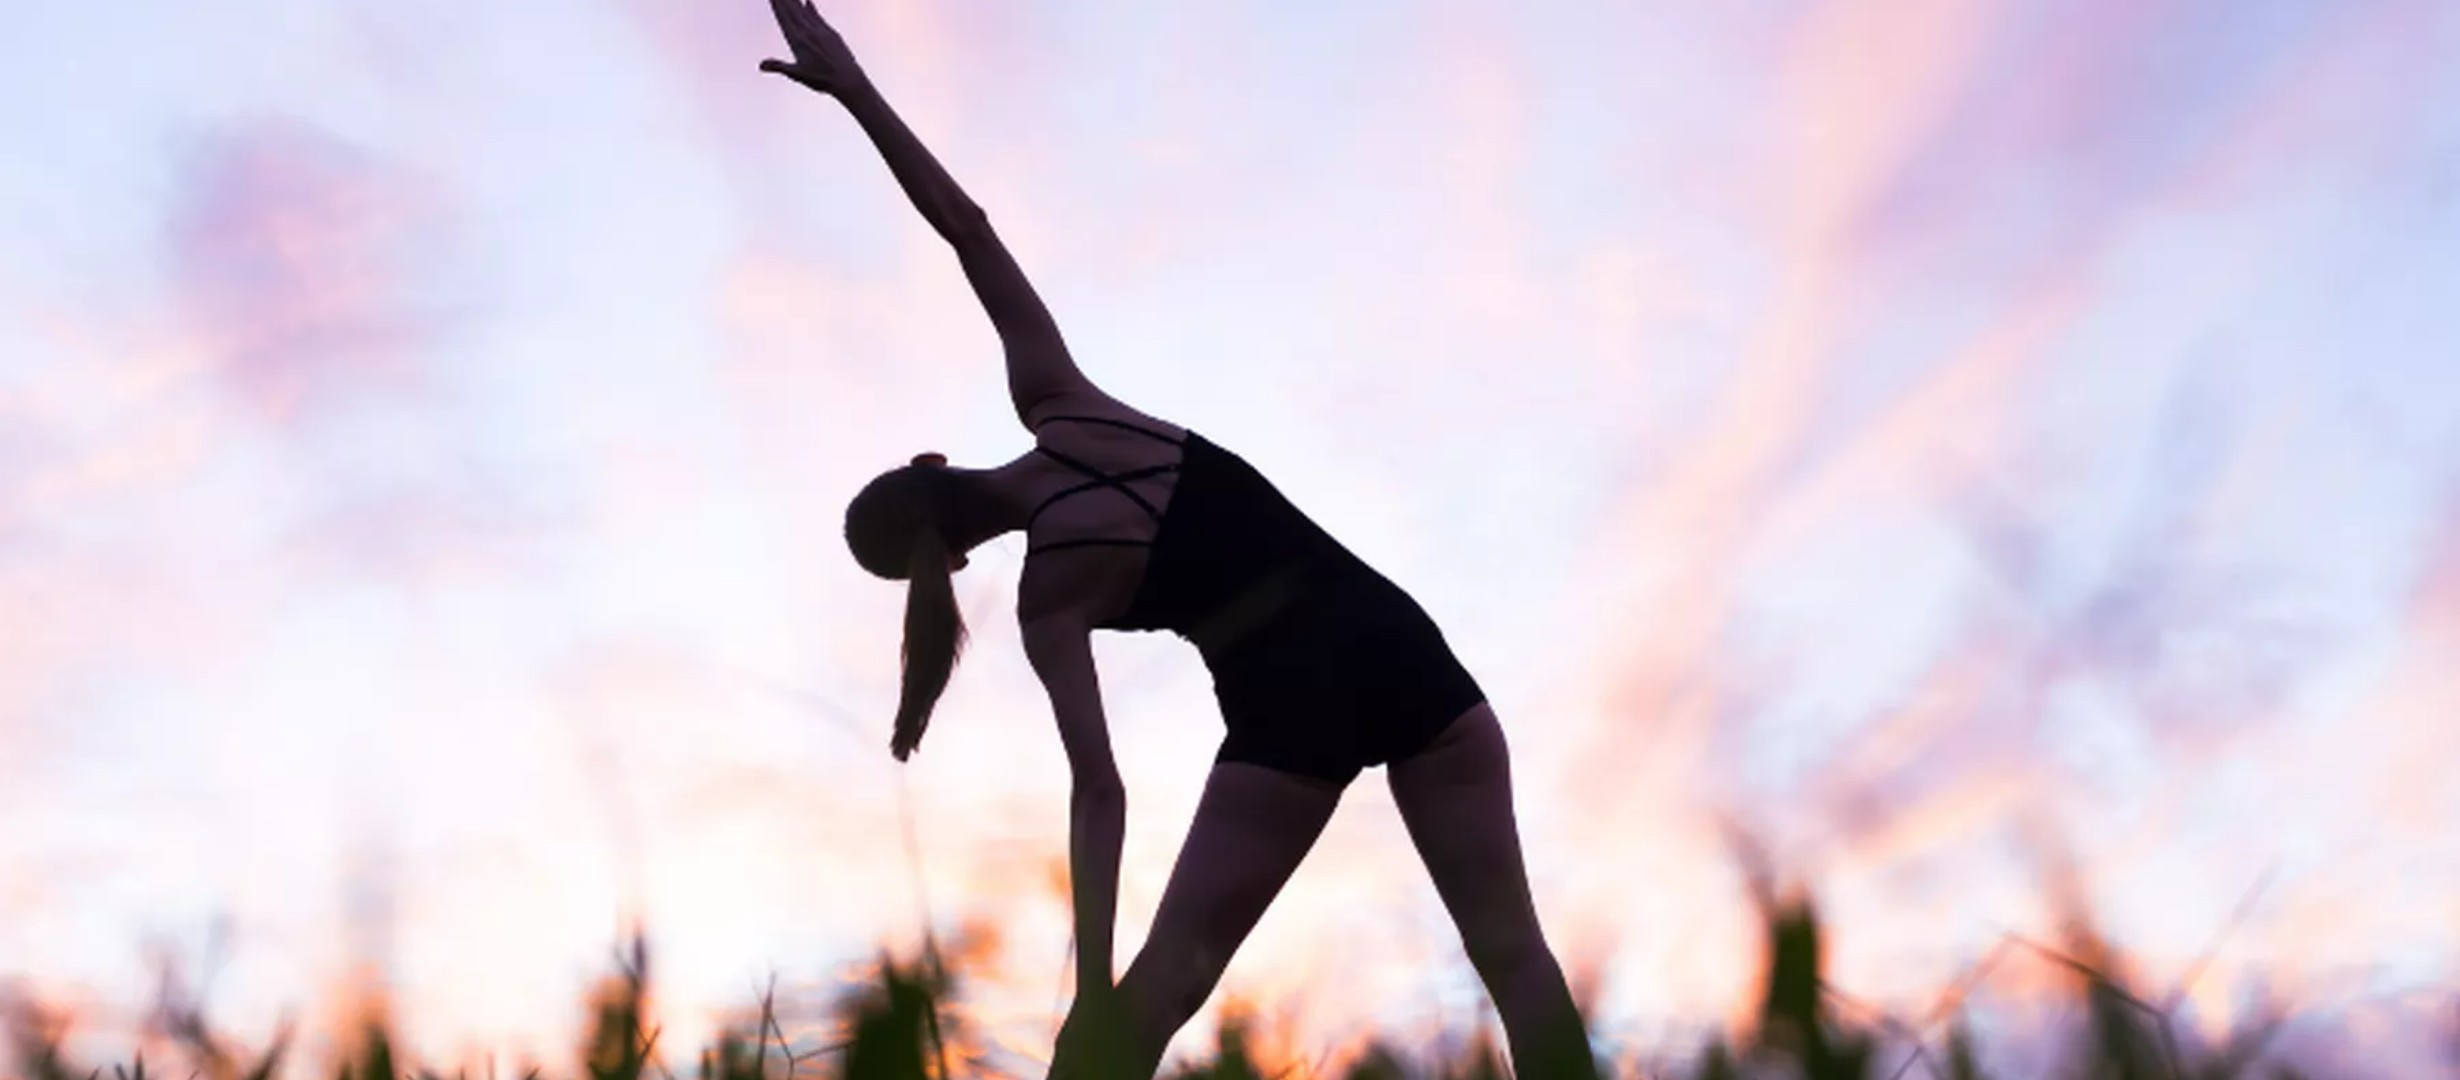 silhouette of a lady stretching, against a blurred sun set background